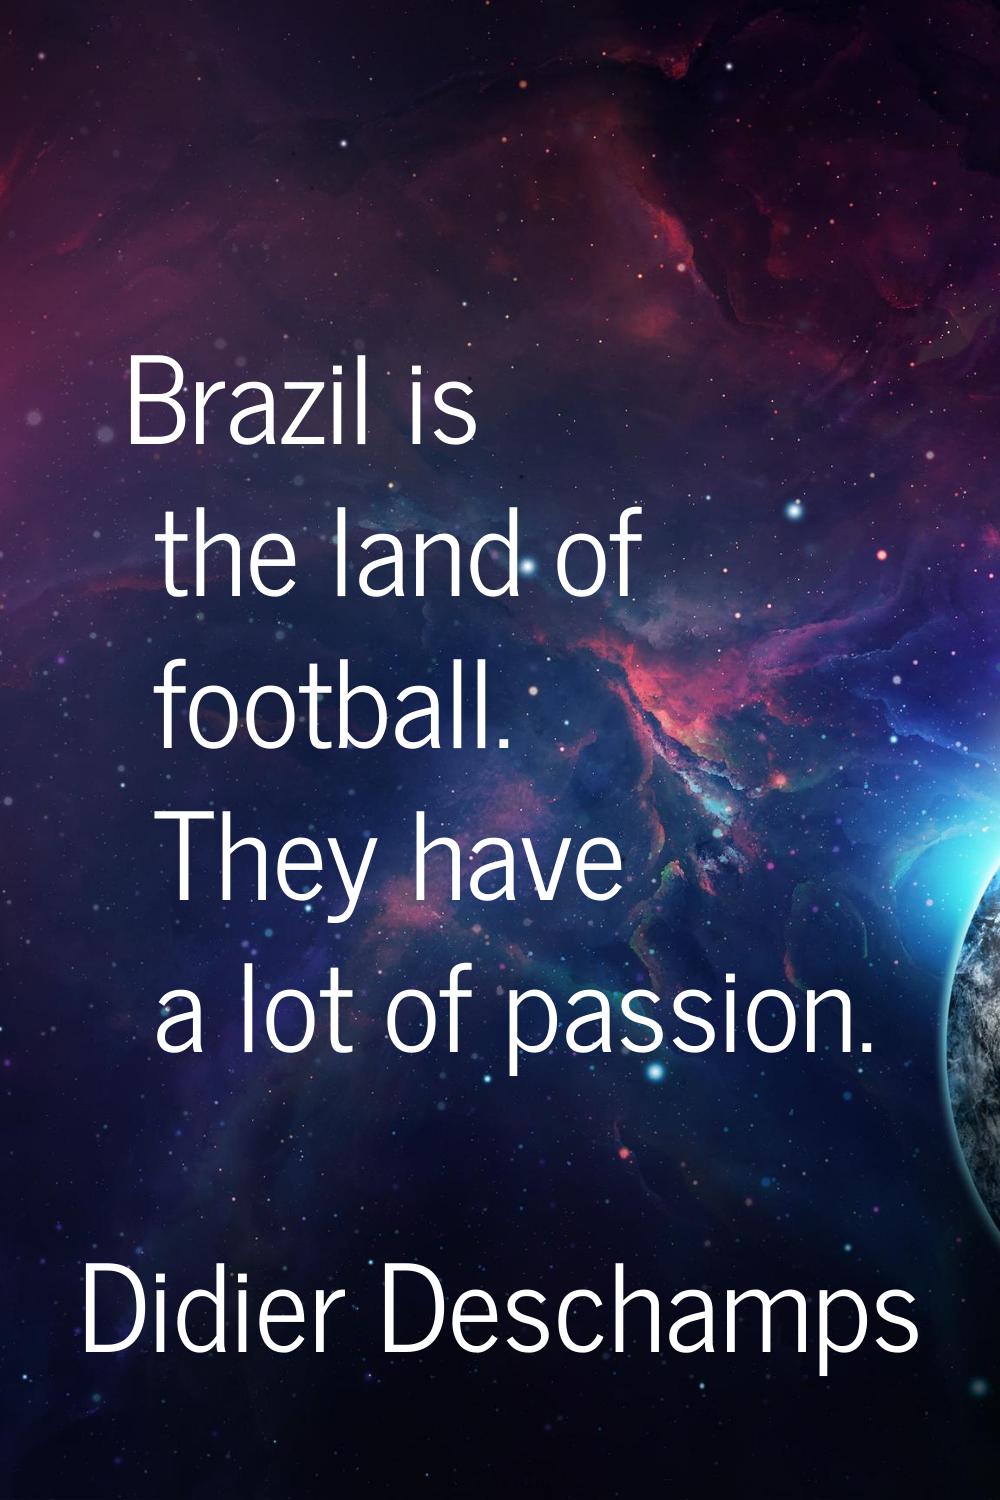 Brazil is the land of football. They have a lot of passion.